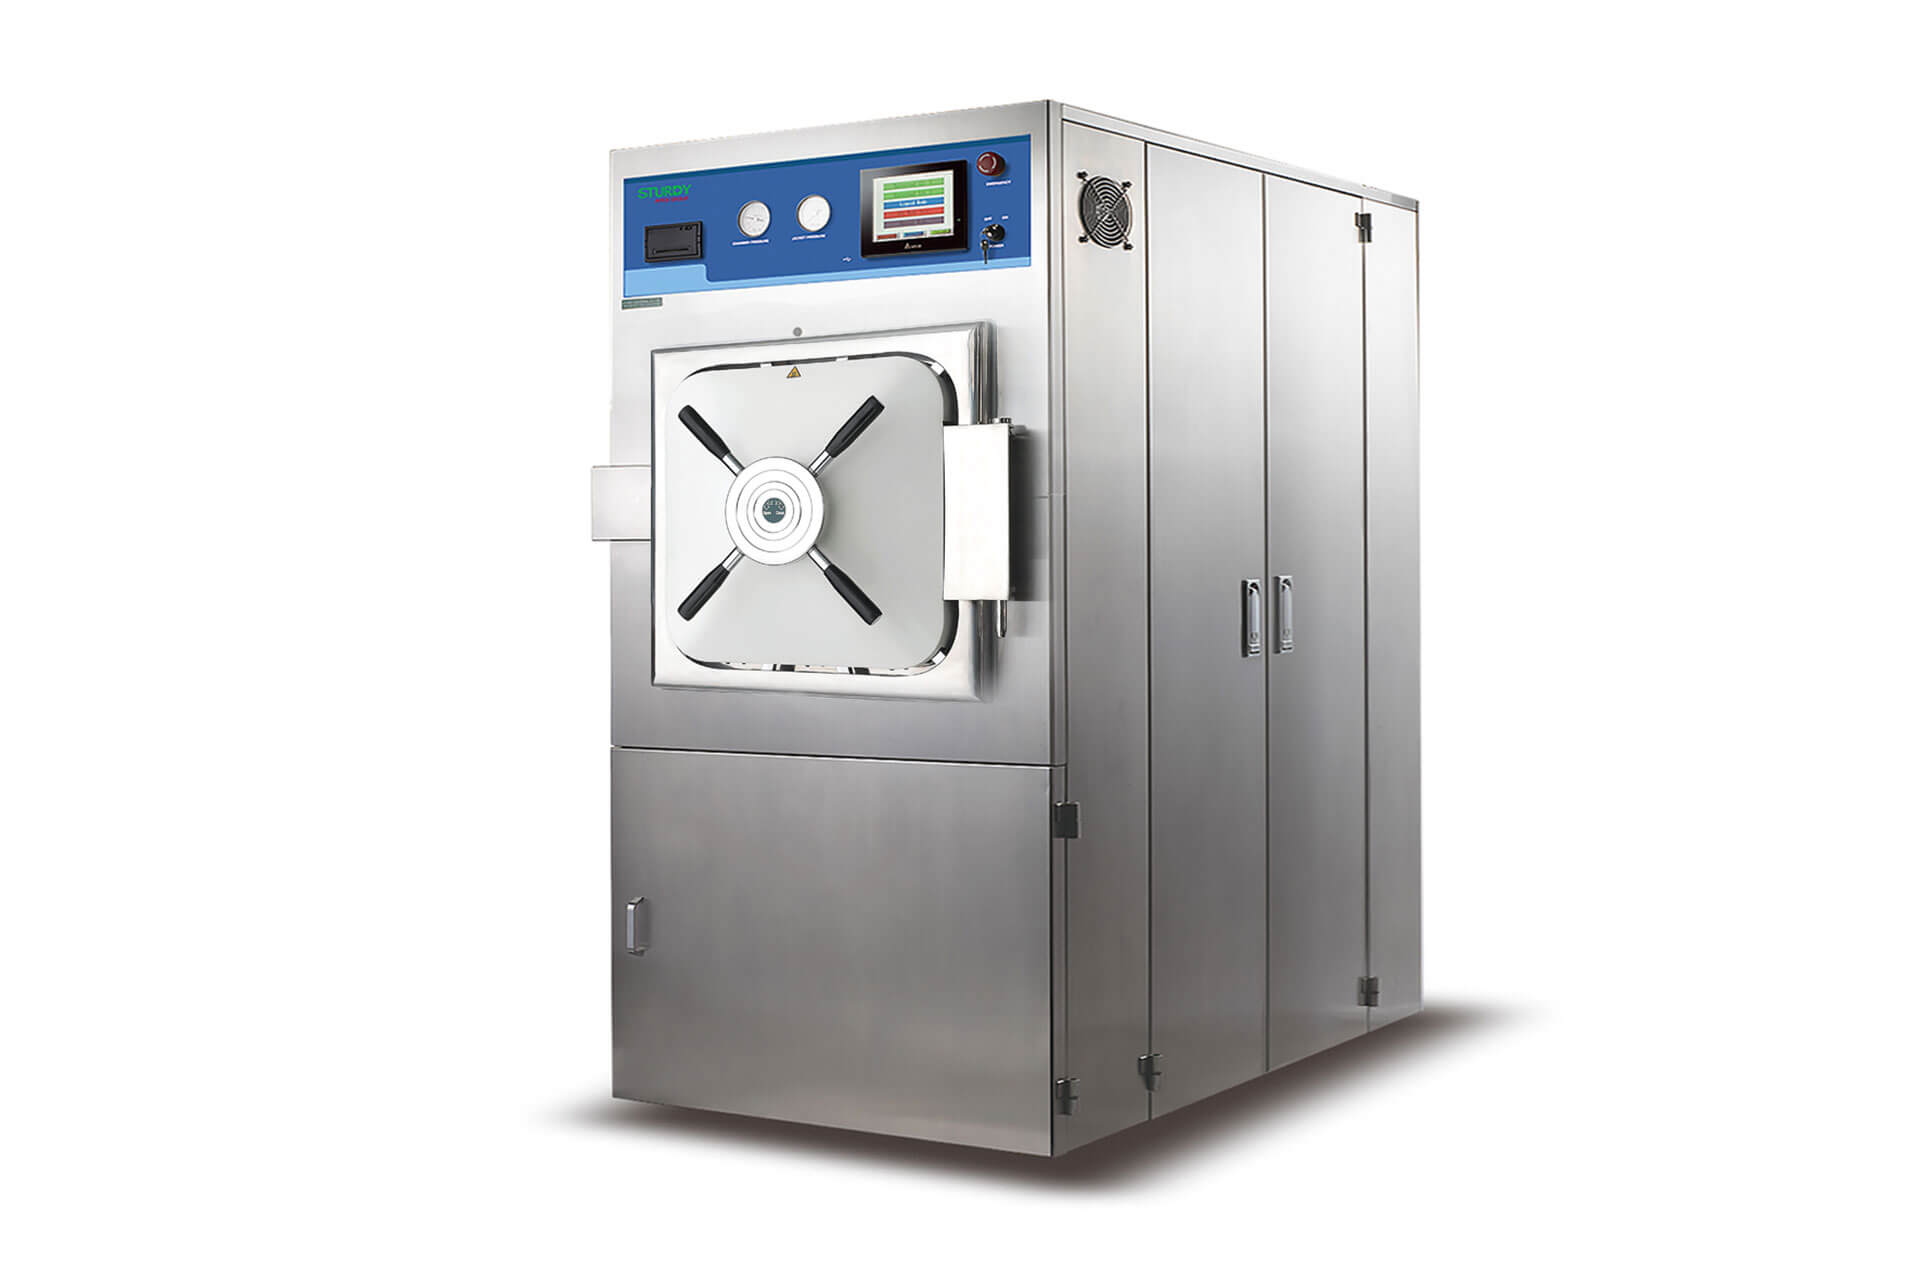 HP Large Autoclave (Square Chamber) - Sturdy